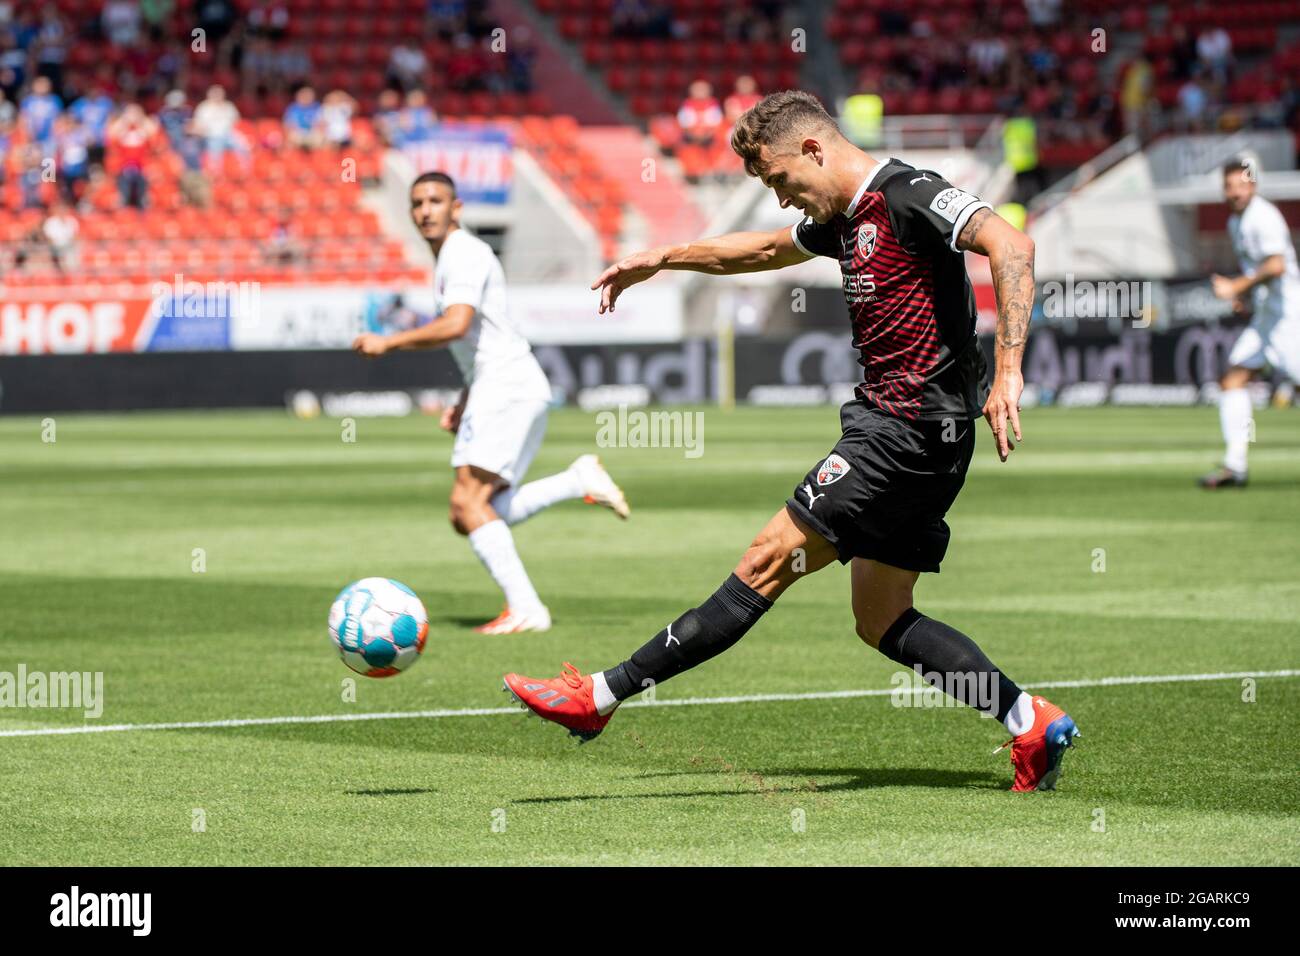 Ingolstadt, Germany. 31st July, 2021. Football: 2. Bundesliga, FC Ingolstadt 04 - 1. FC Heidenheim, Matchday 2 at Audi Sportpark. Dennis Eckert from Ingolstadt plays the ball. Credit: Matthias Balk/dpa - IMPORTANT NOTE: In accordance with the regulations of the DFL Deutsche Fußball Liga and/or the DFB Deutscher Fußball-Bund, it is prohibited to use or have used photographs taken in the stadium and/or of the match in the form of sequence pictures and/or video-like photo series./dpa/Alamy Live News Stock Photo